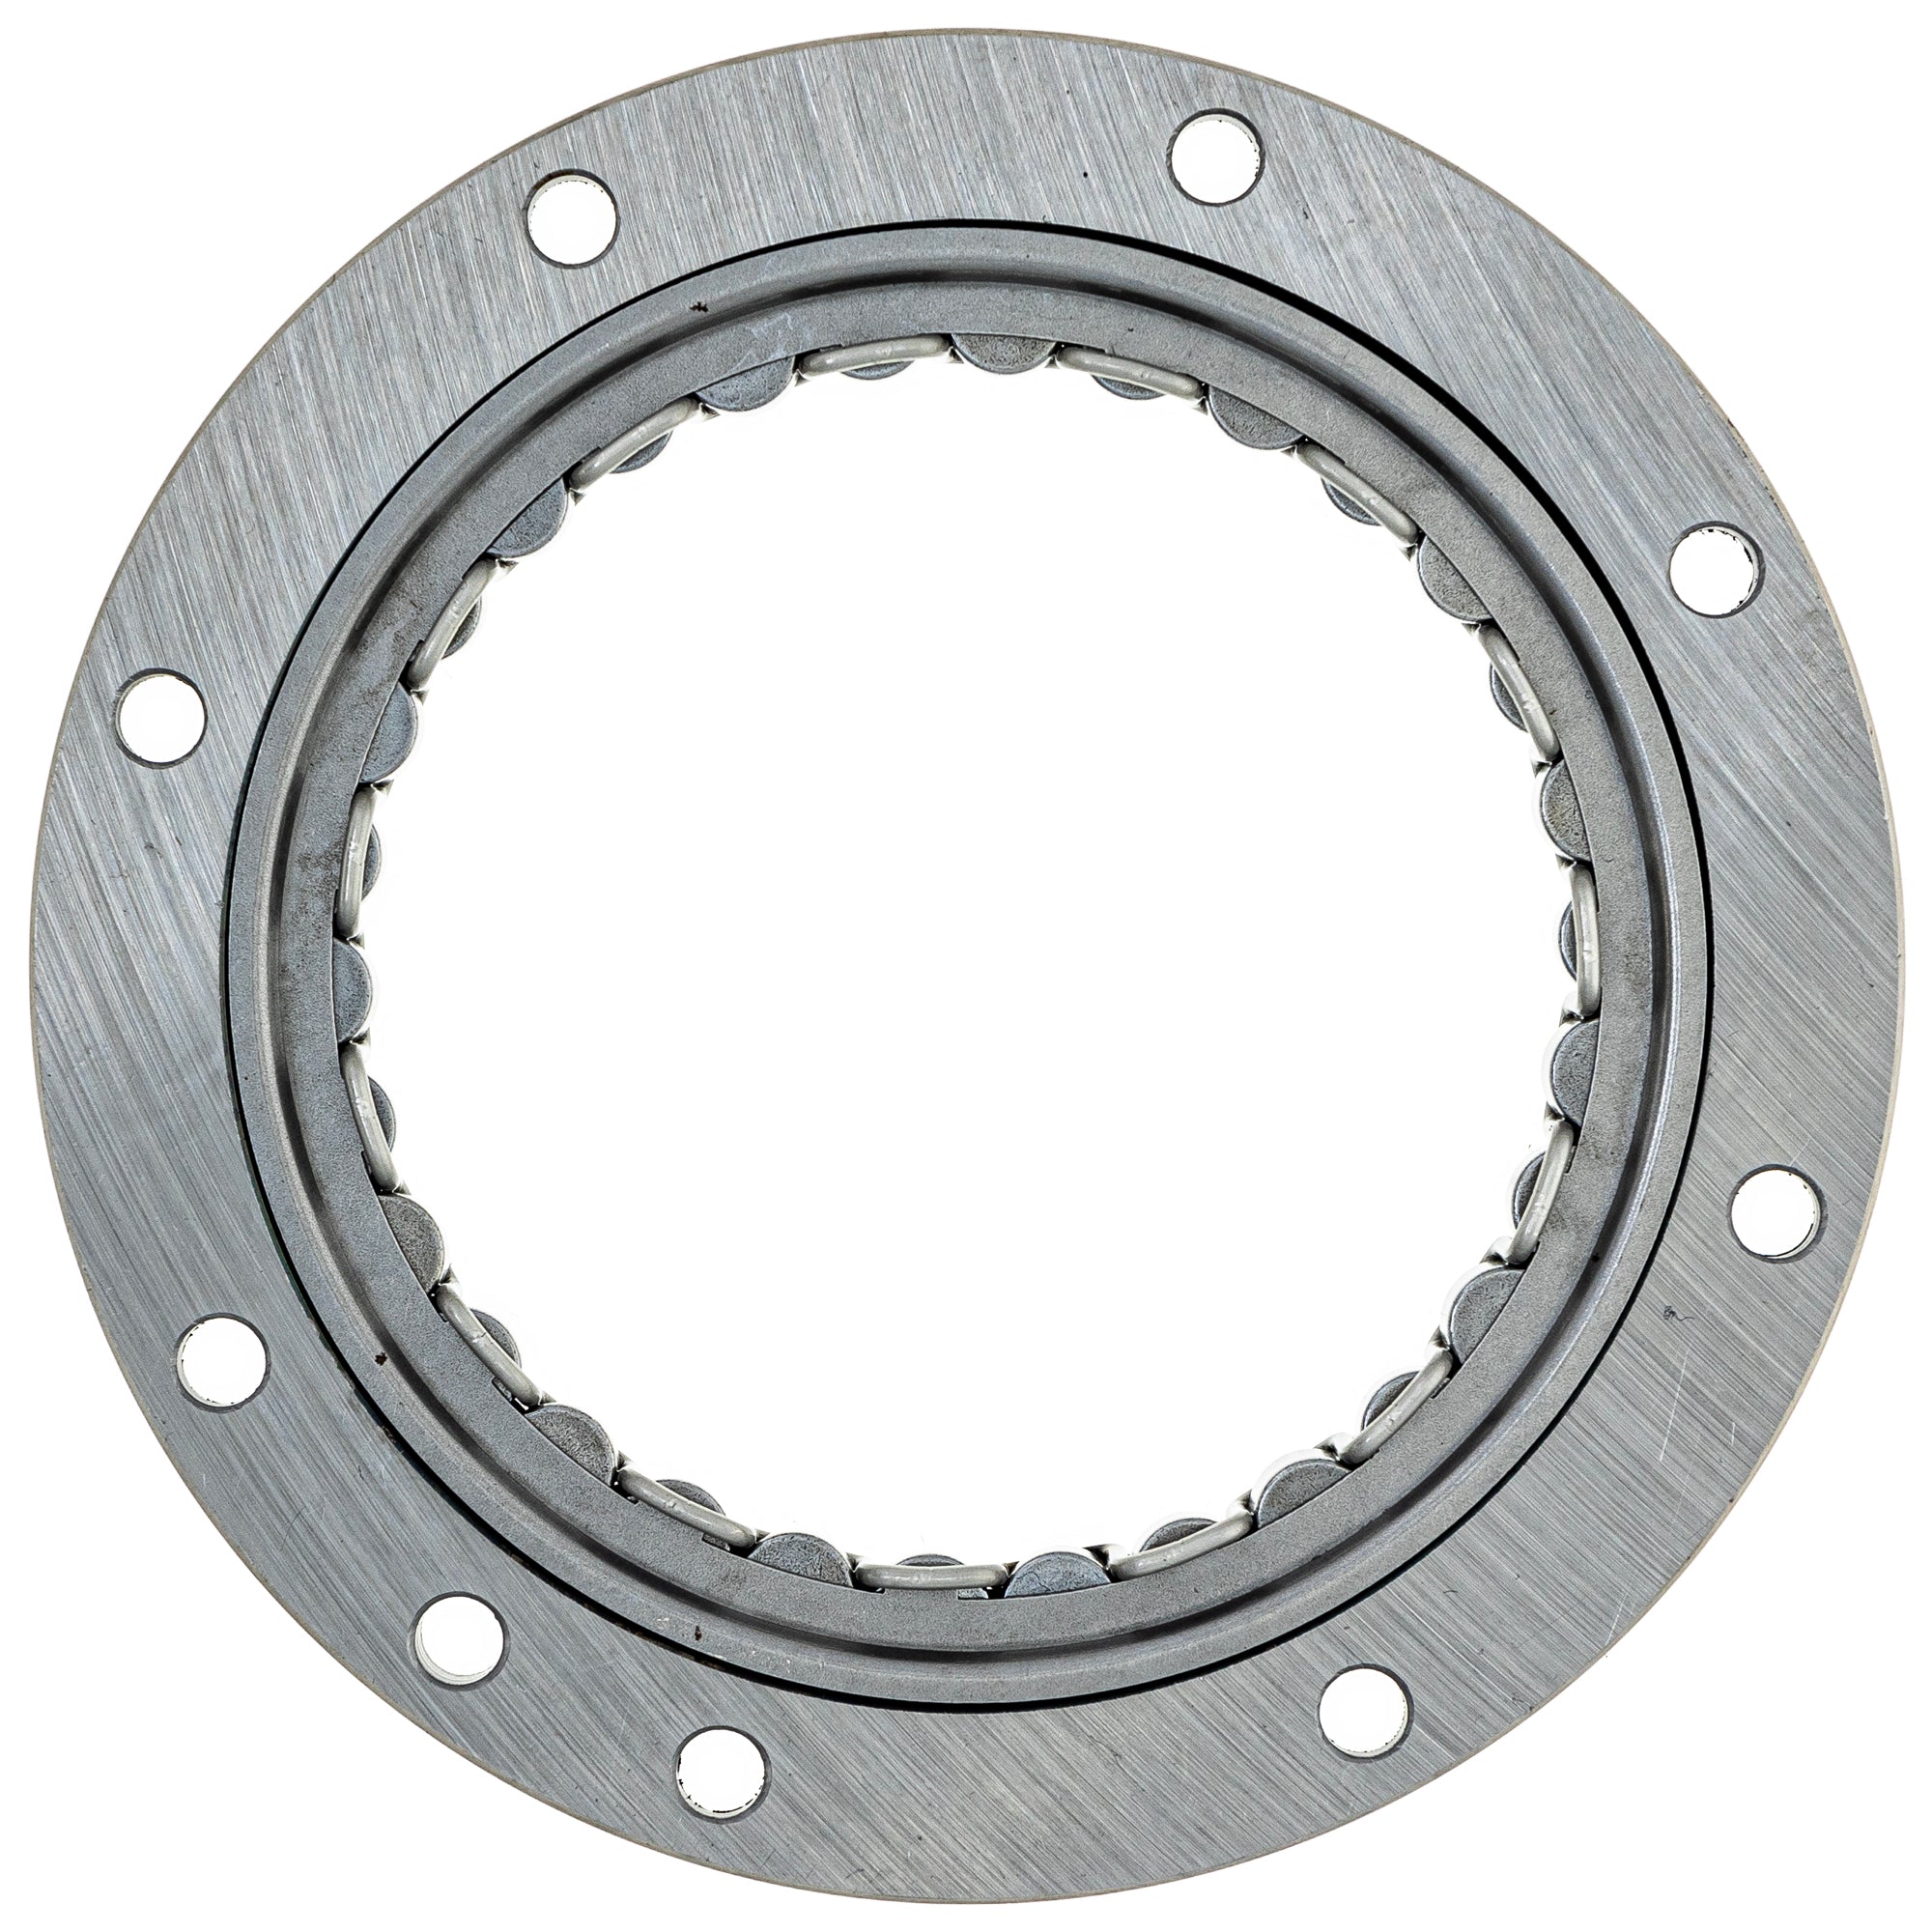 Starter Clutch One-Way Bearing Assembly 519-CSC2220O For Yamaha 99999-03908-00 5EL-15590-00-00